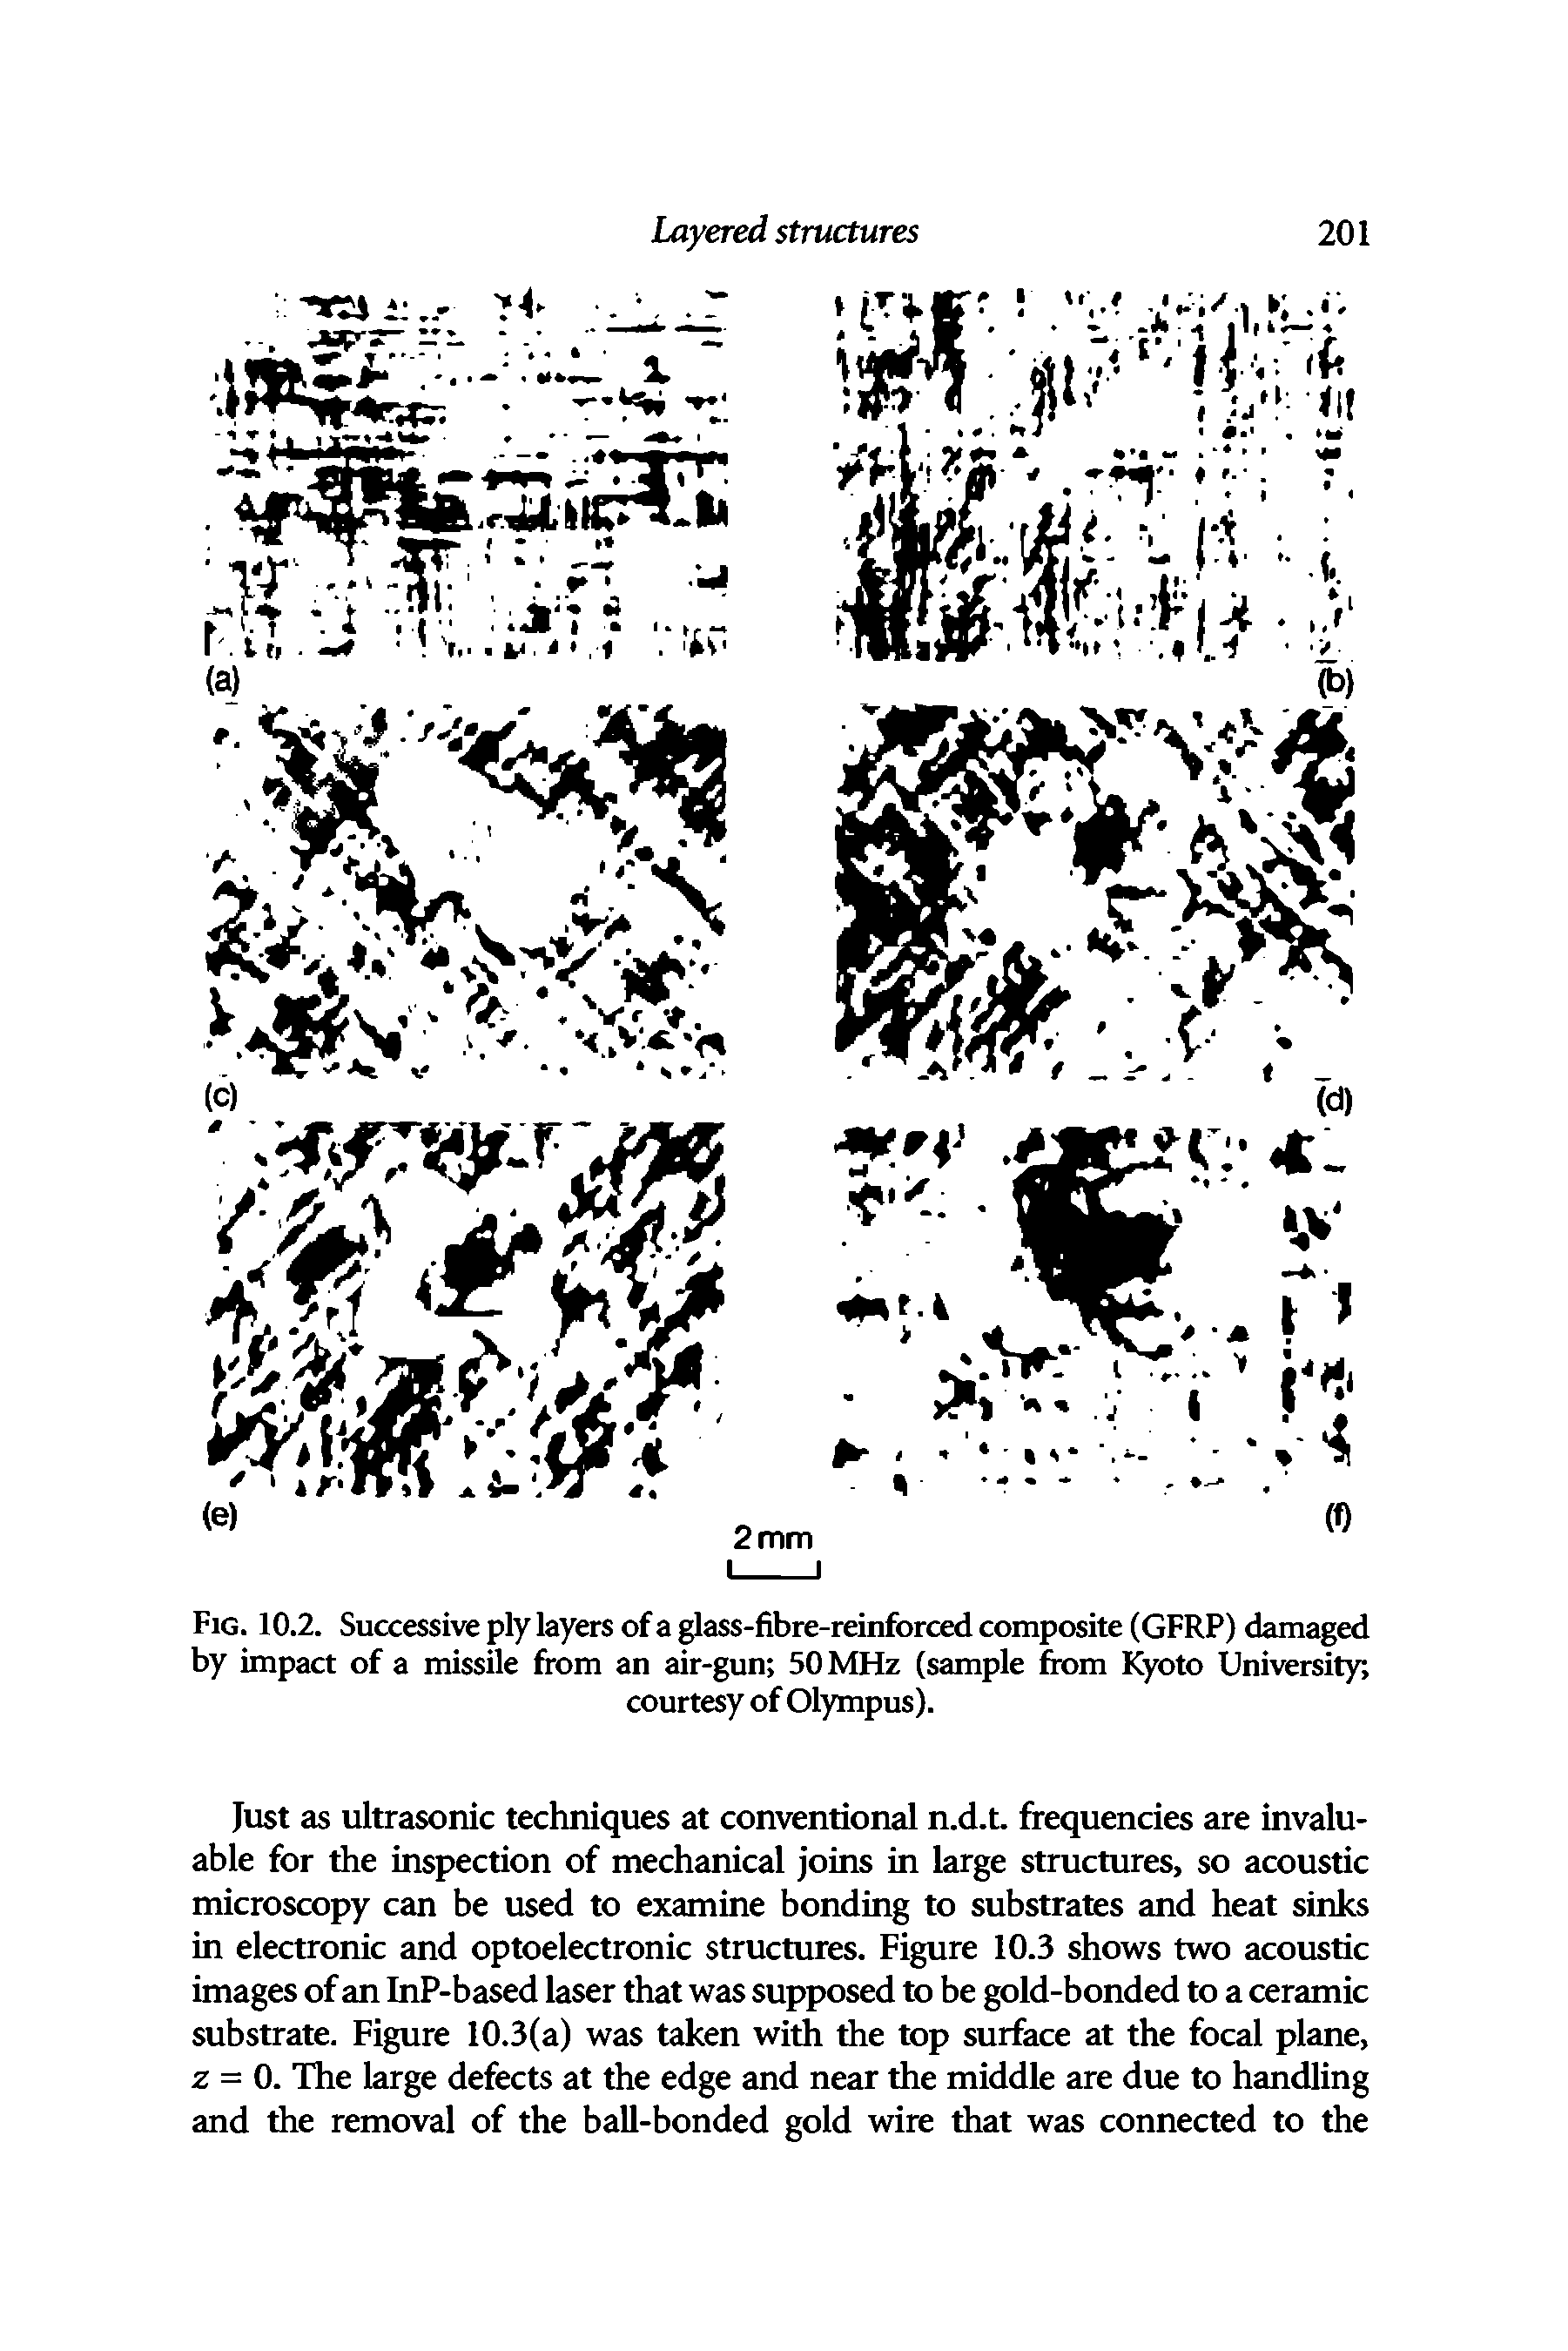 Fig. 10.2. Successive ply layers of a glass-fibre-reinforced composite (GFRP) damaged by impact of a missile from an air-gun 50 MHz (sample from Kyoto University,...